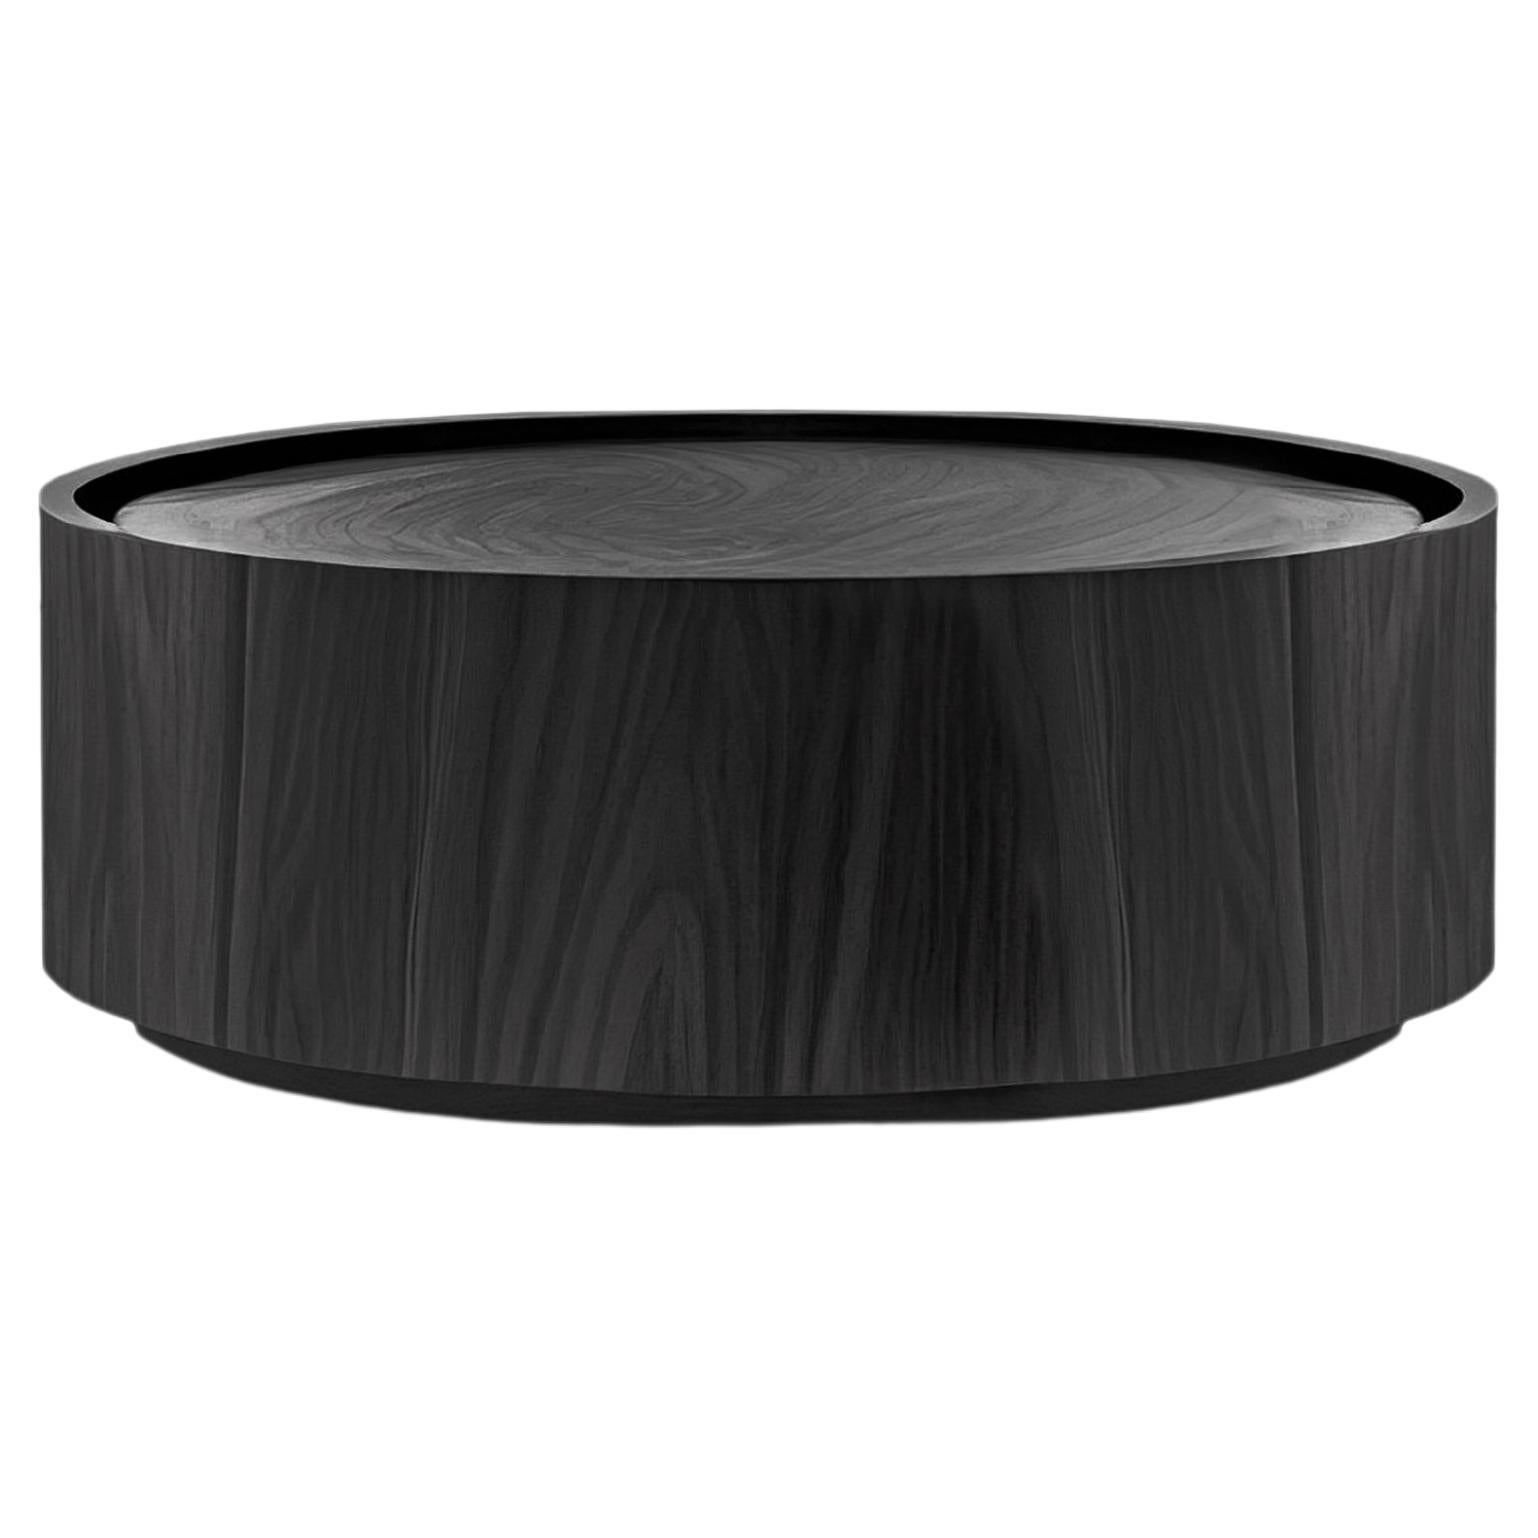 Round Coffee Table Made of Black Tinted Wood Veneer by Nono Furniture